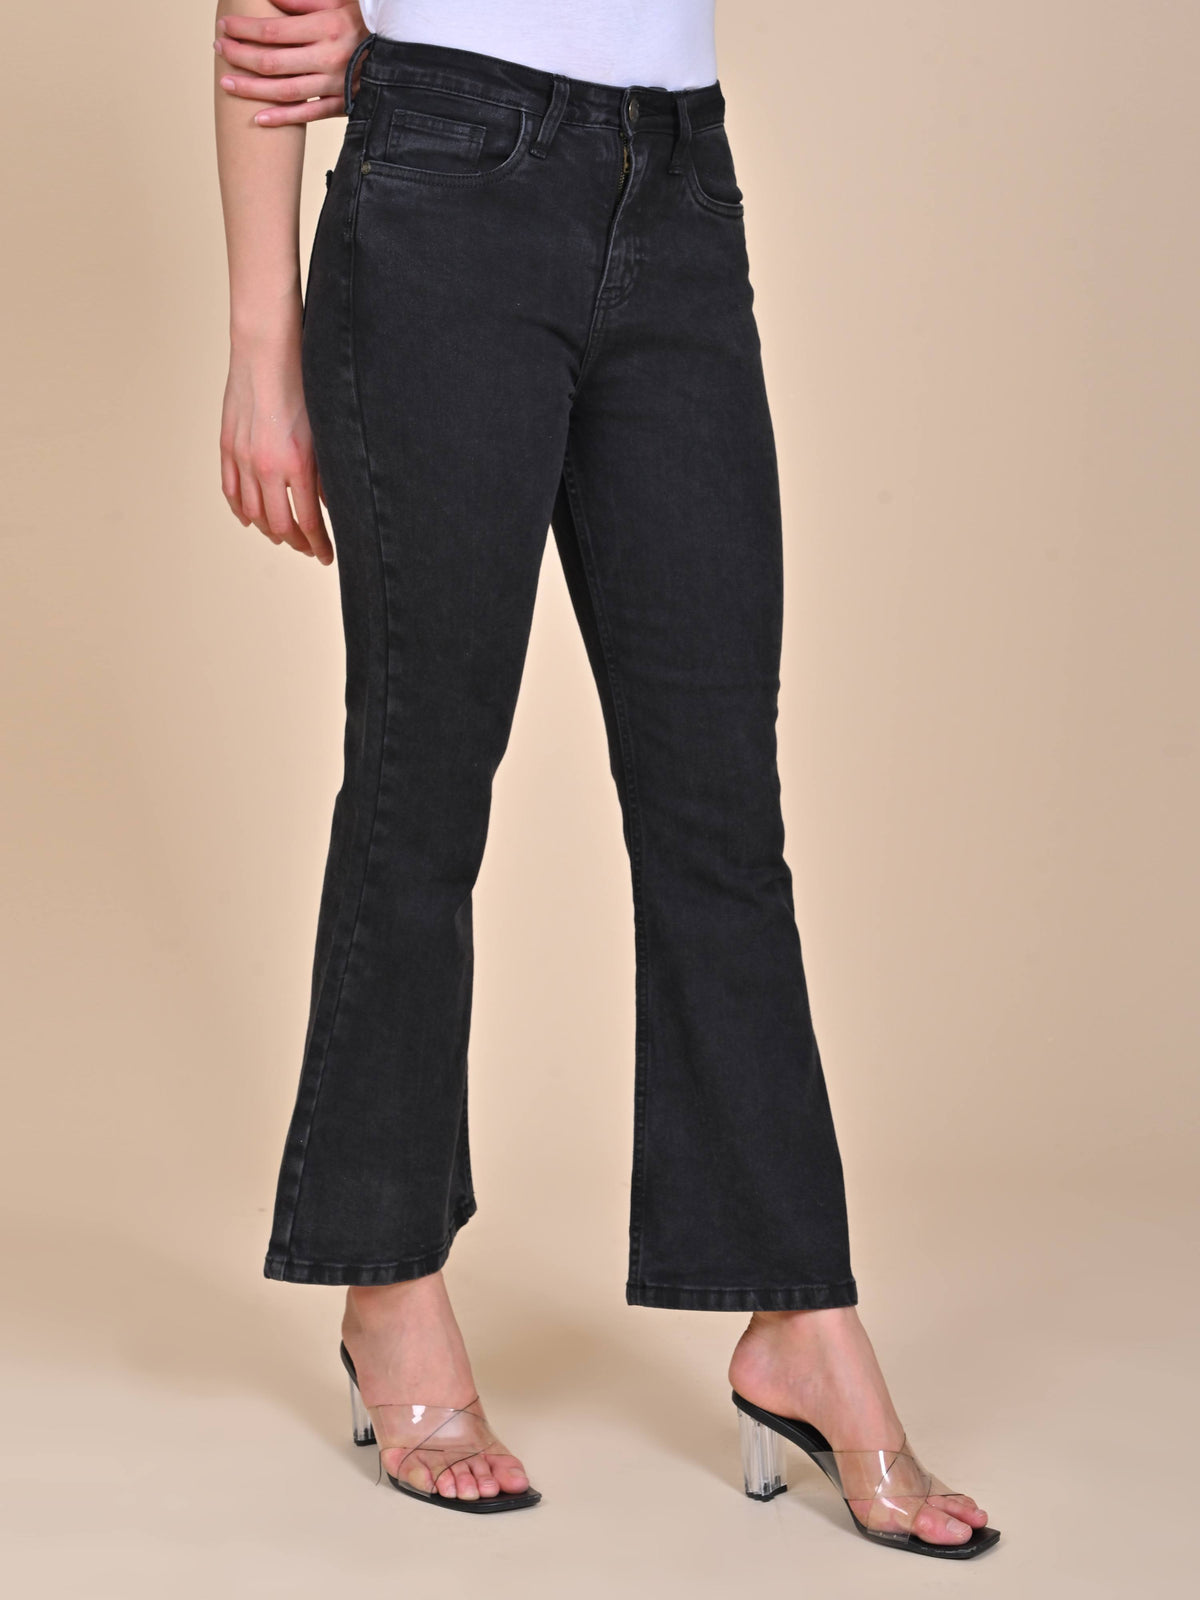 High Rise Bootcut jeans - Charcoal Black